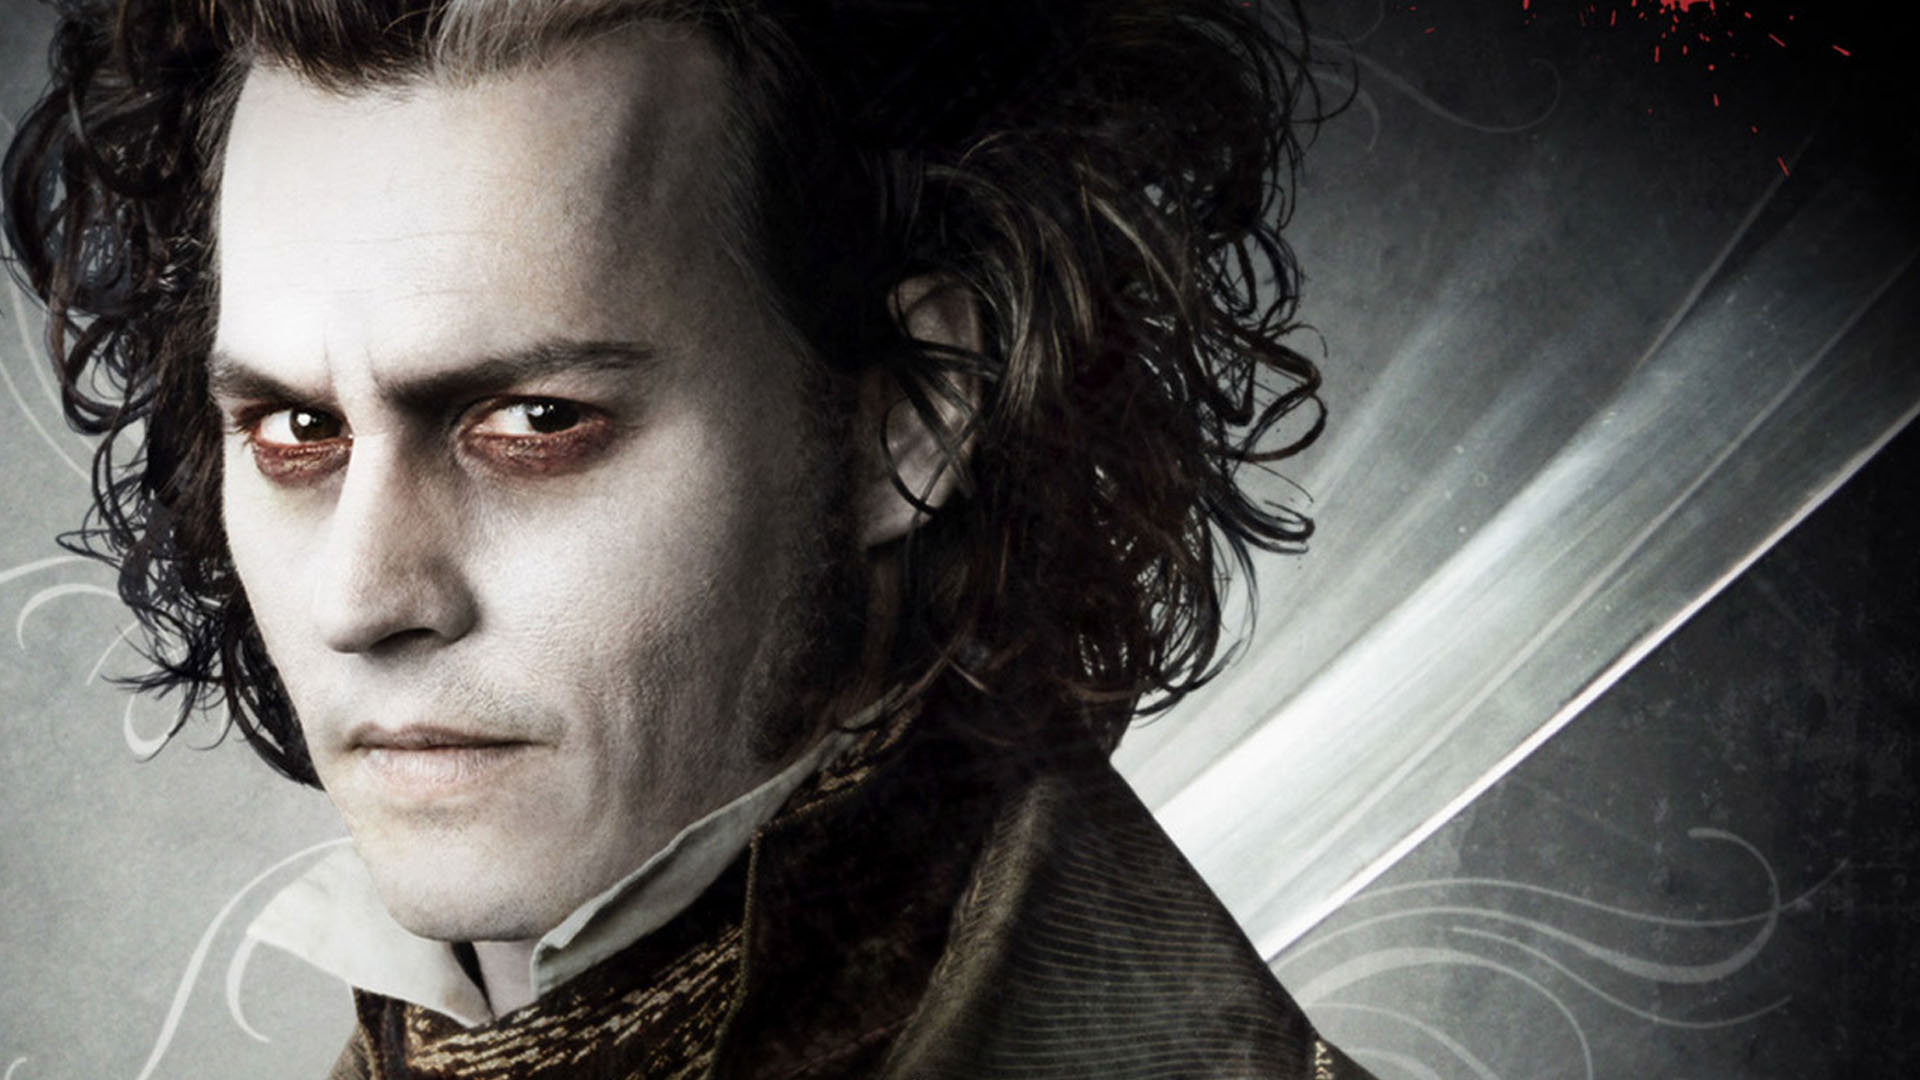 sweeney todd watch online with subtitles